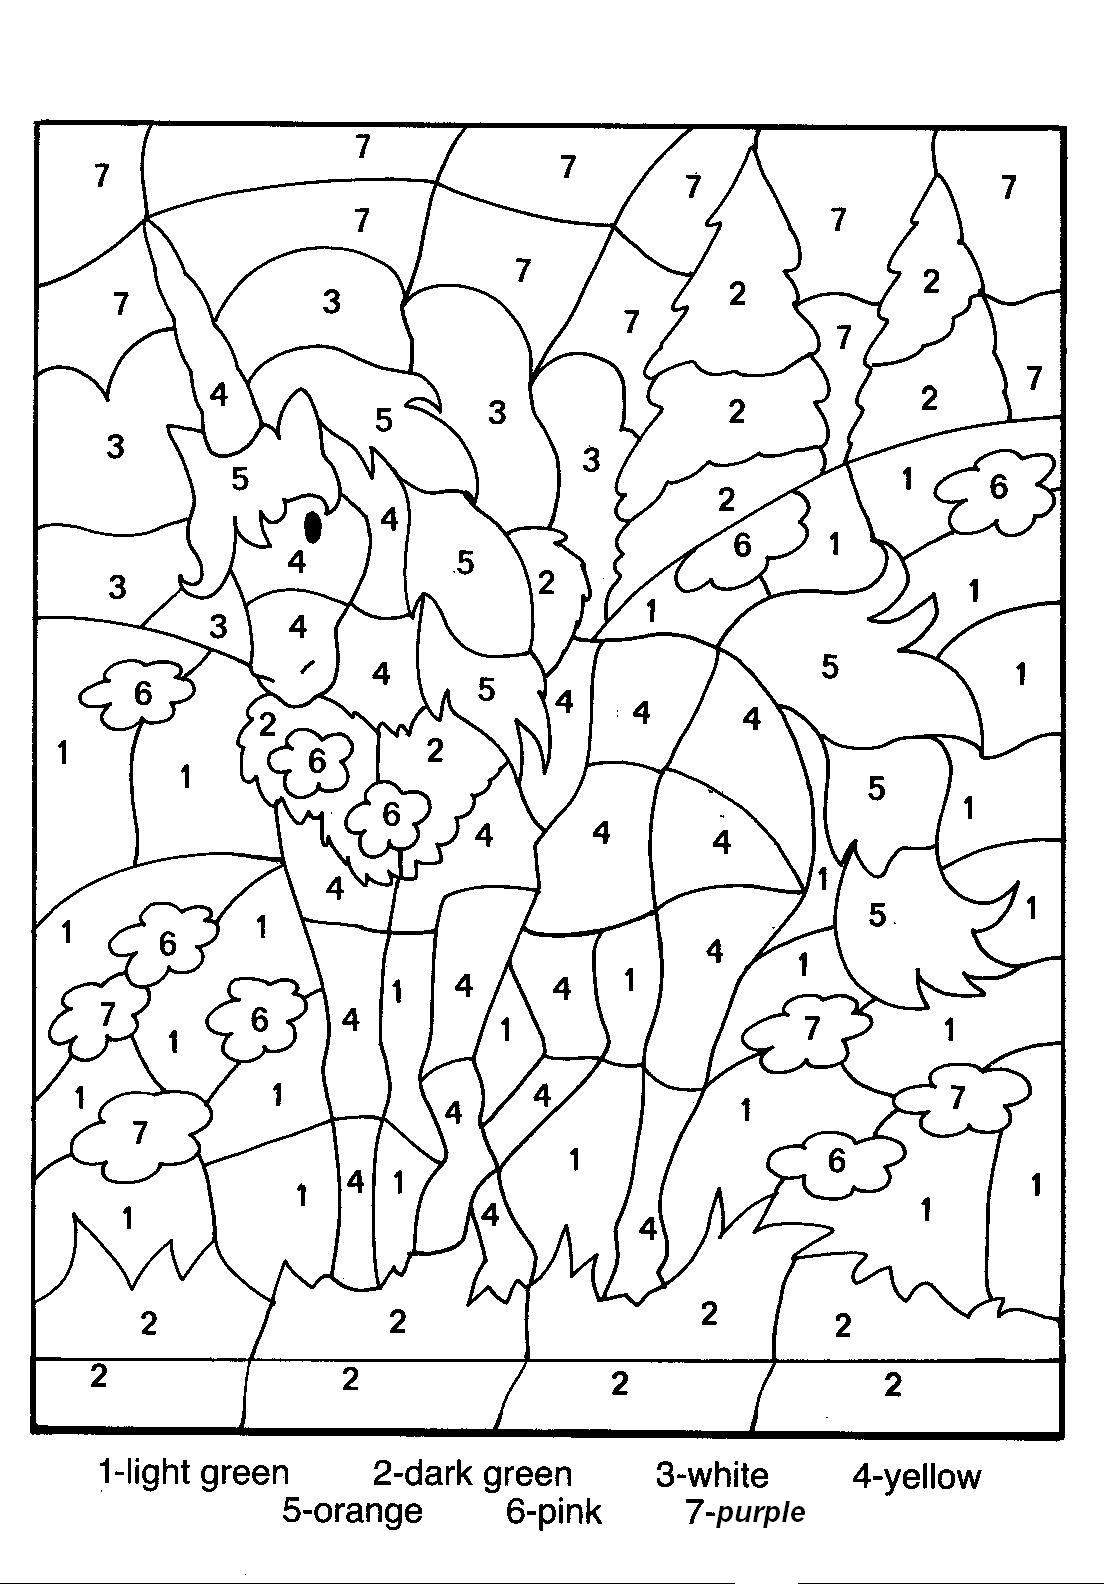 color-by-number-coloring-pages-l-385d15eaac30450b